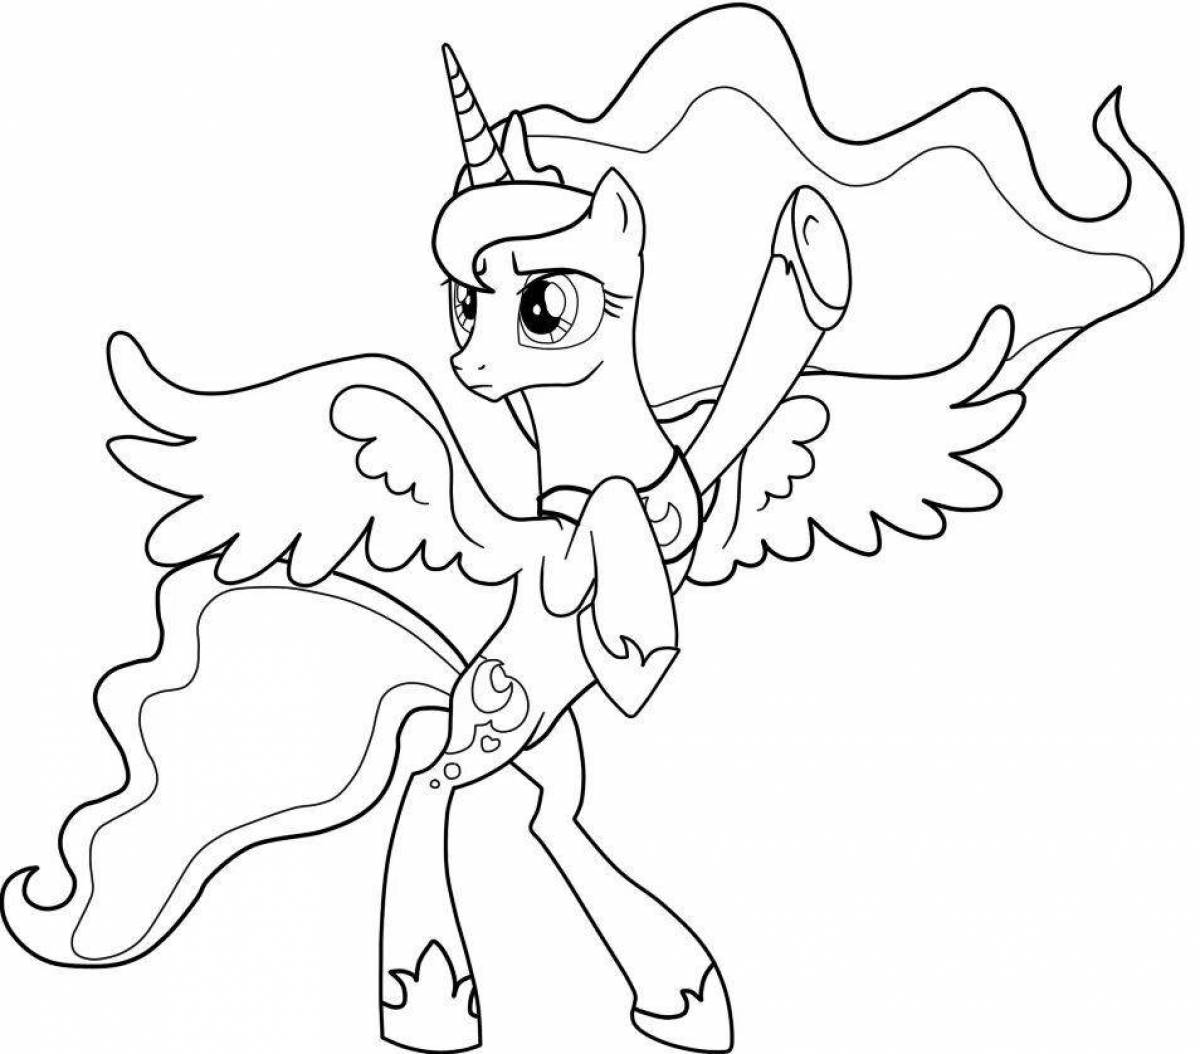 Gorgeous pony print coloring page